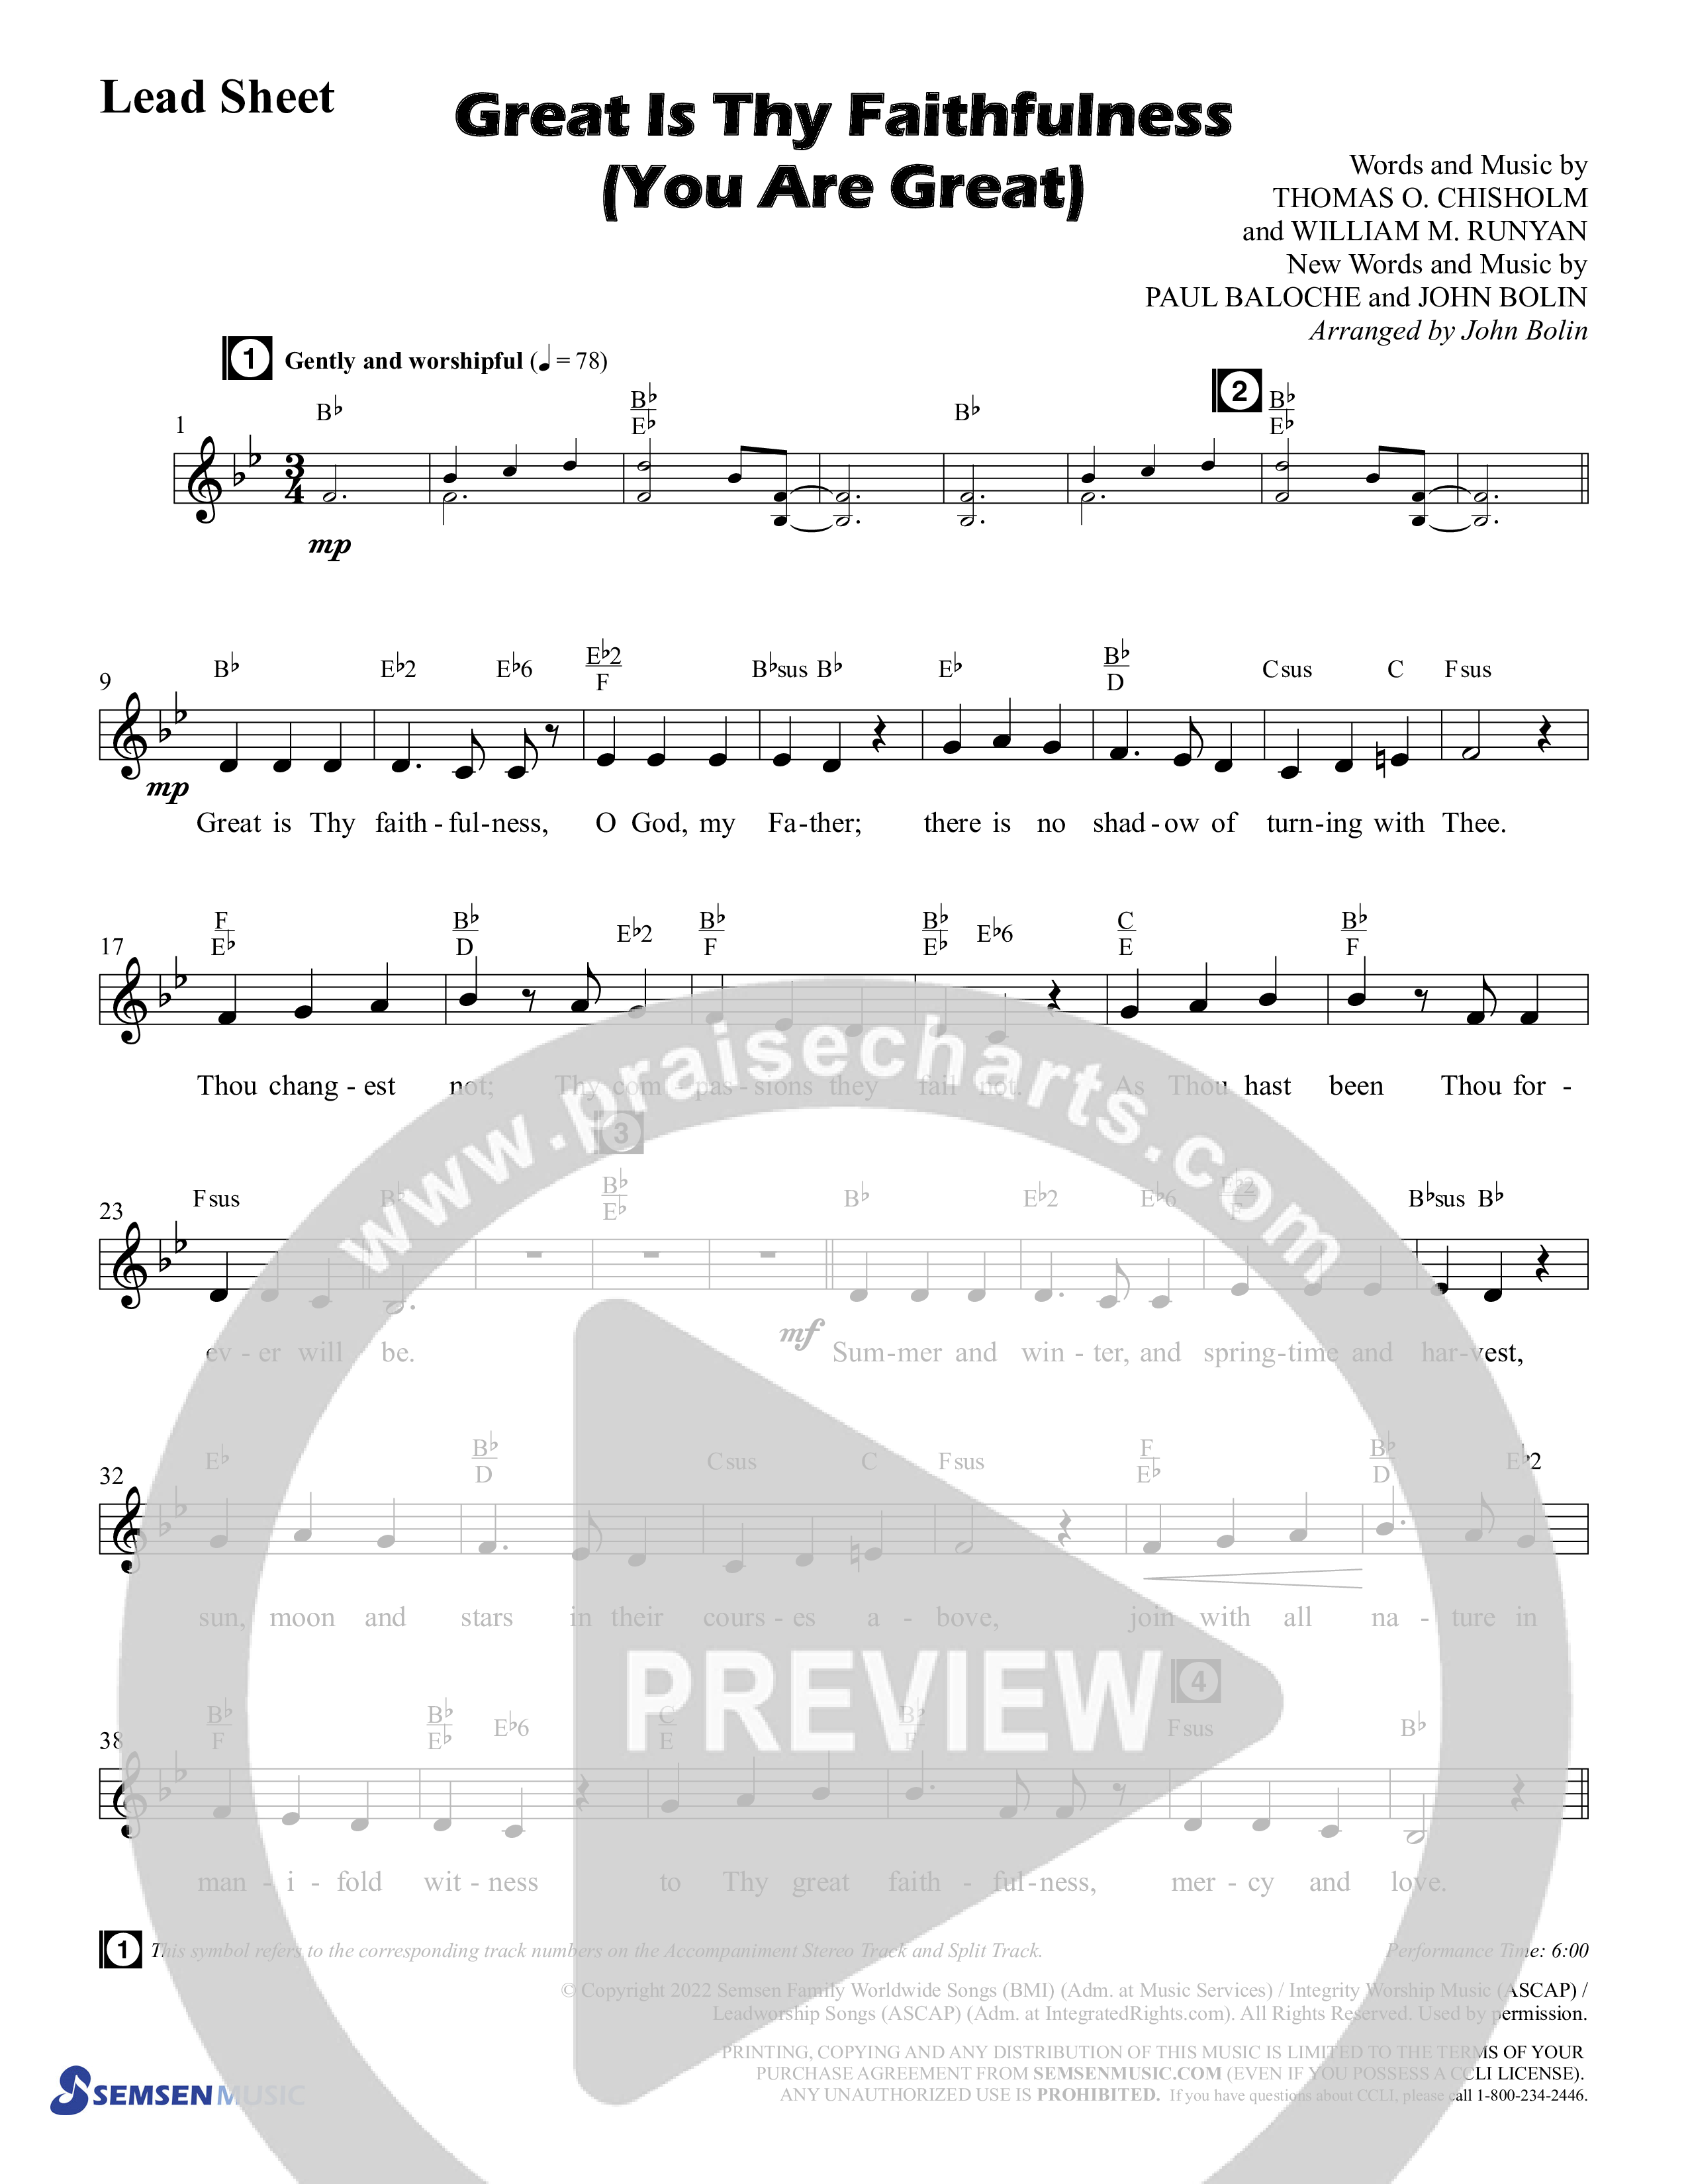 Great Is Thy Faithfulness (You Are Great) (Choral Anthem SATB) Chords & Lead Sheet (Semsen Music / Arr. John Bolin / Orch. David Shipps)